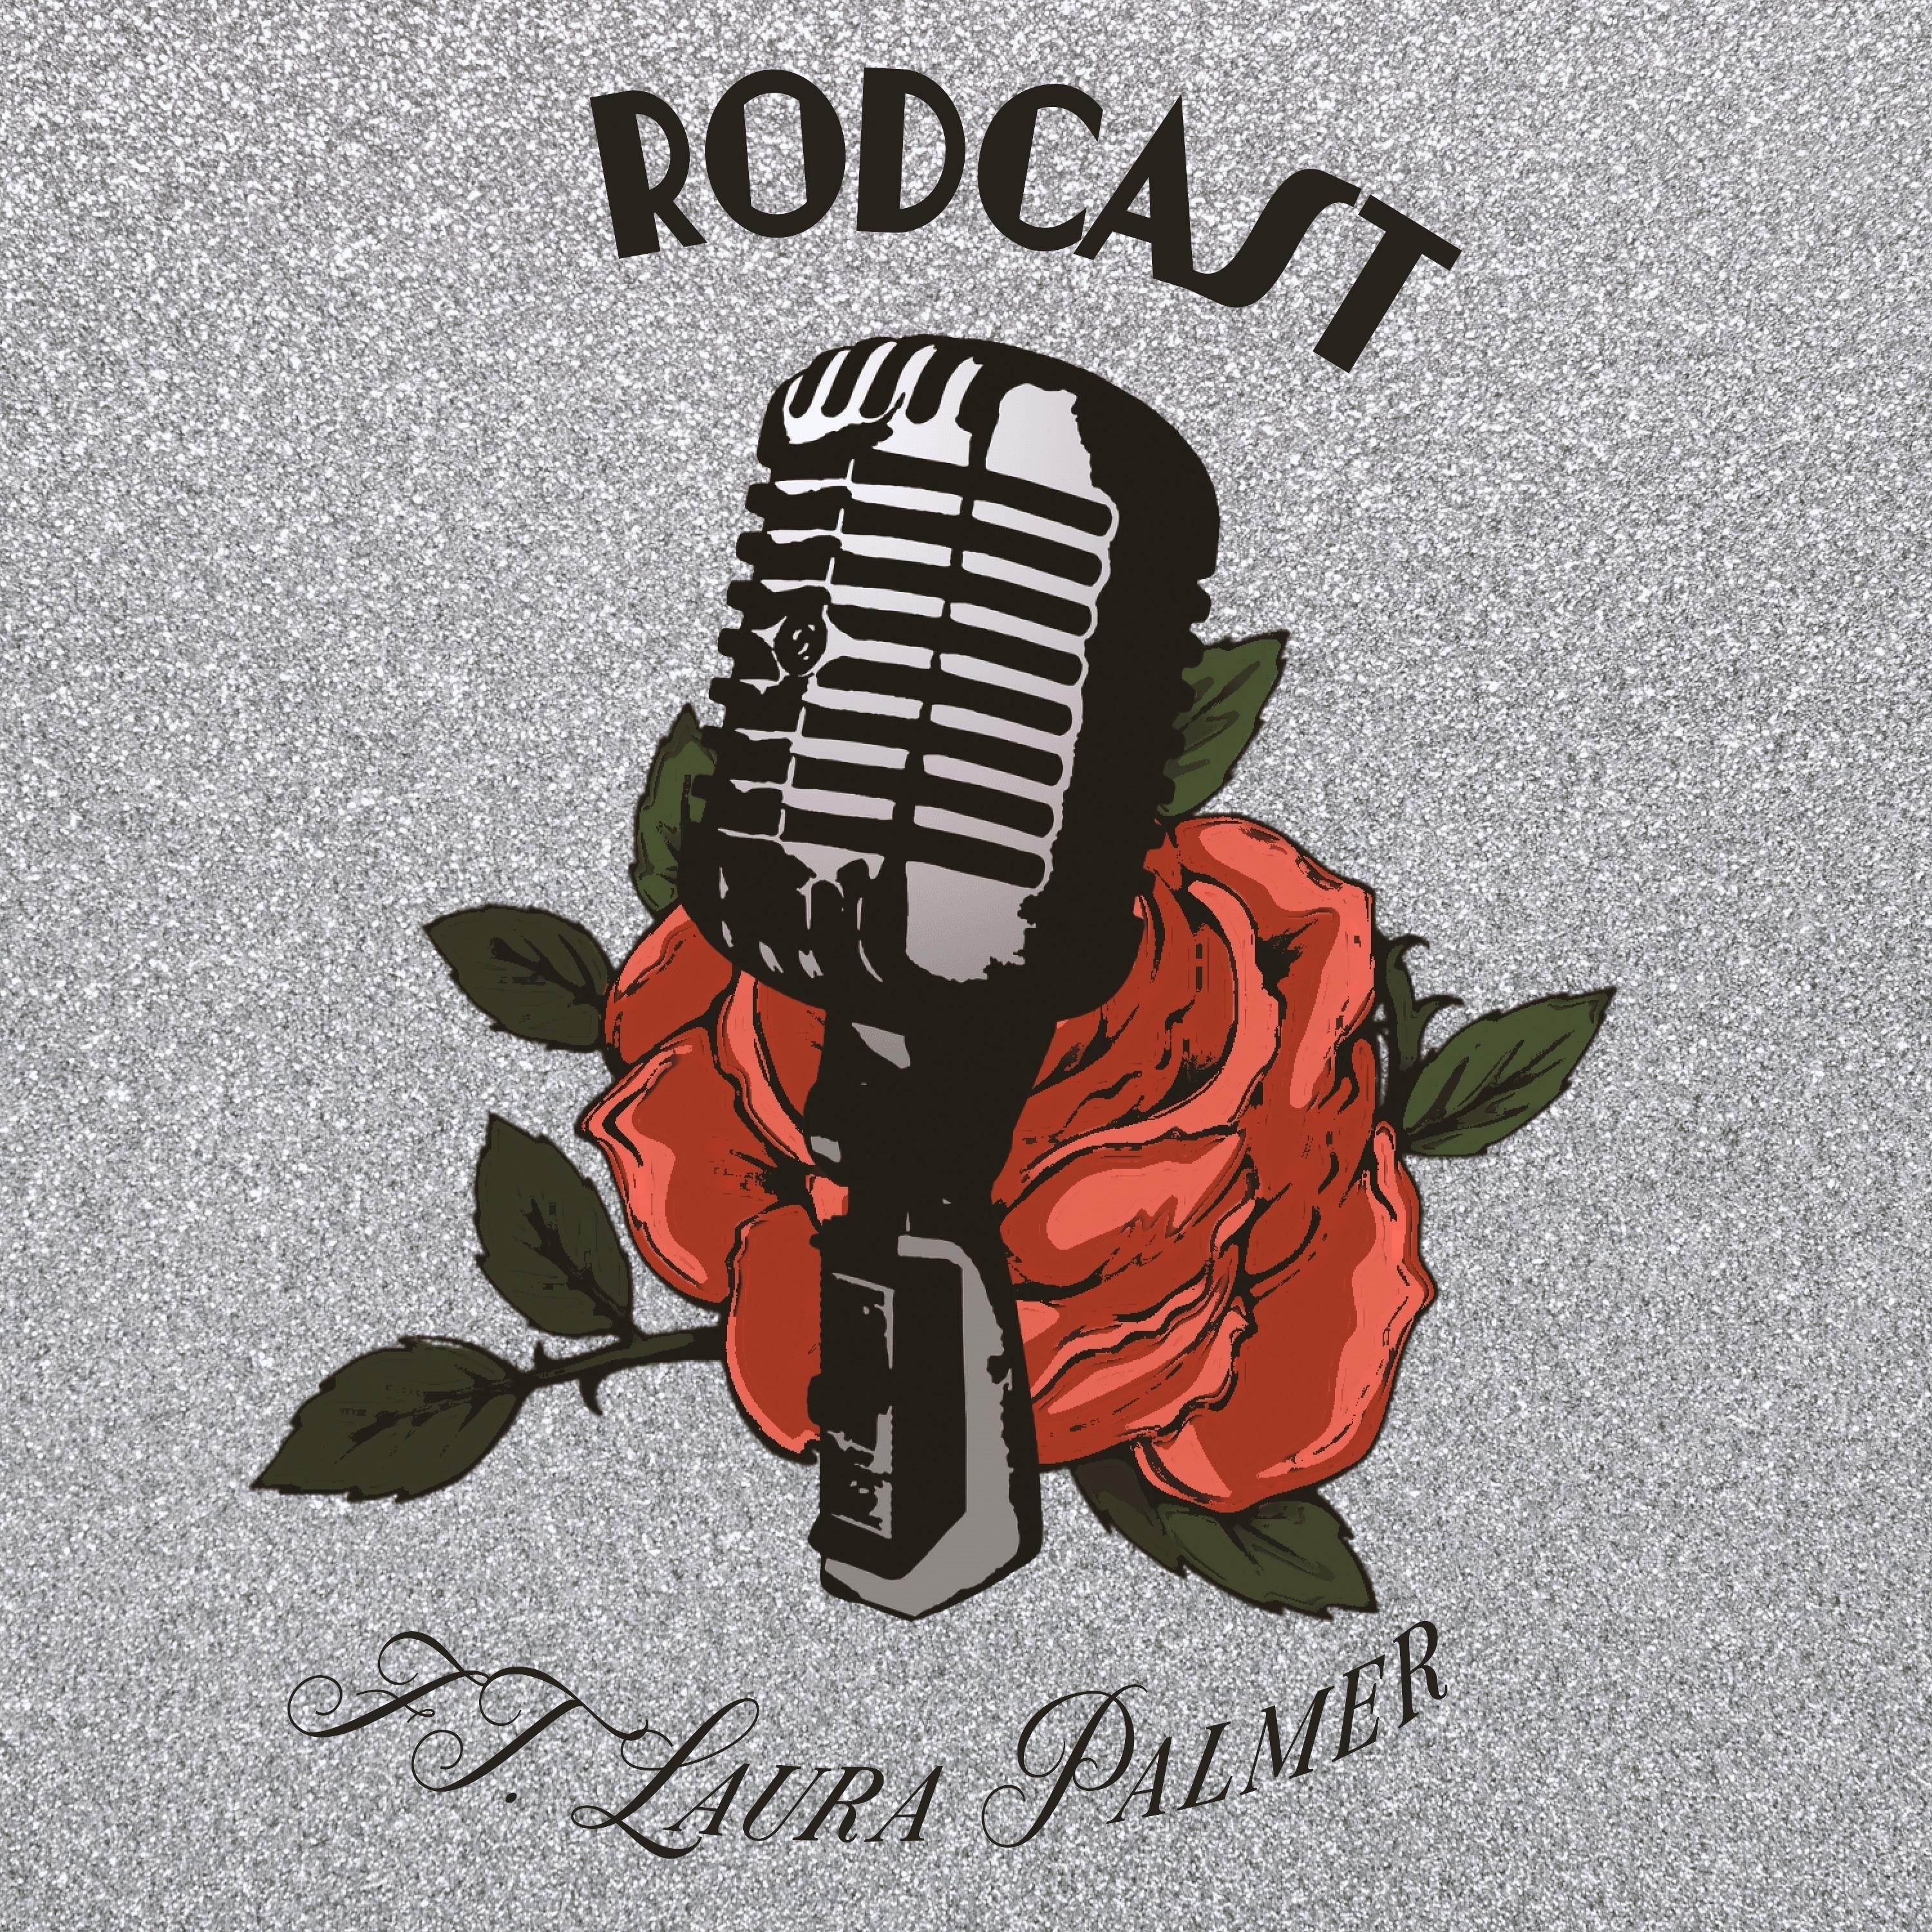 RodCast ft. Laura Palmer